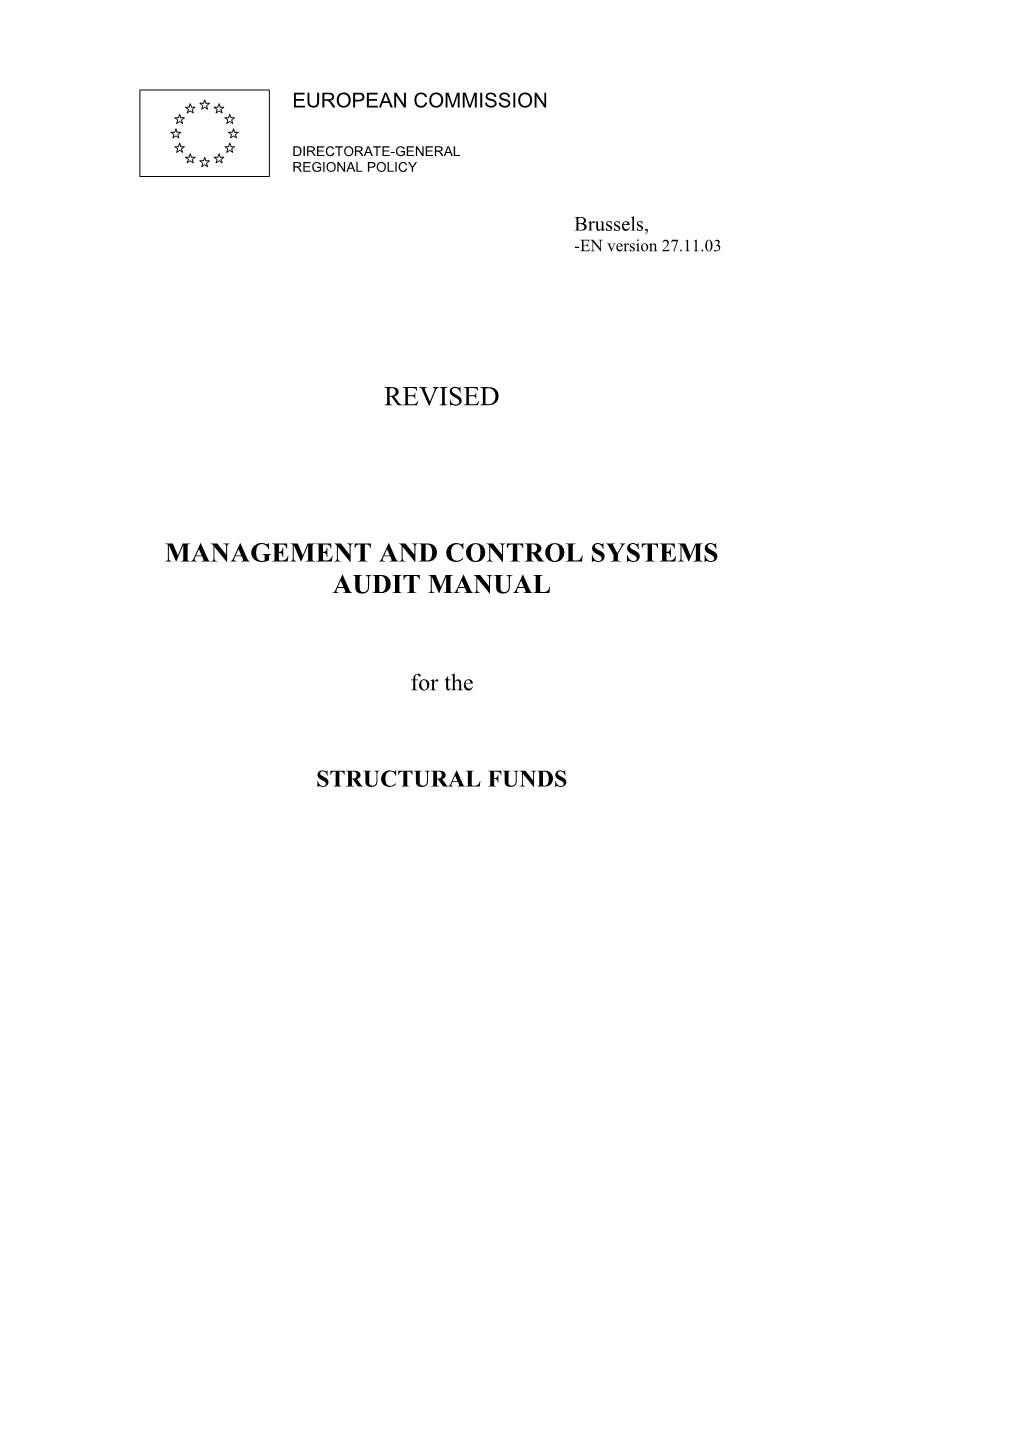 Management and Control Systems Audit Manual